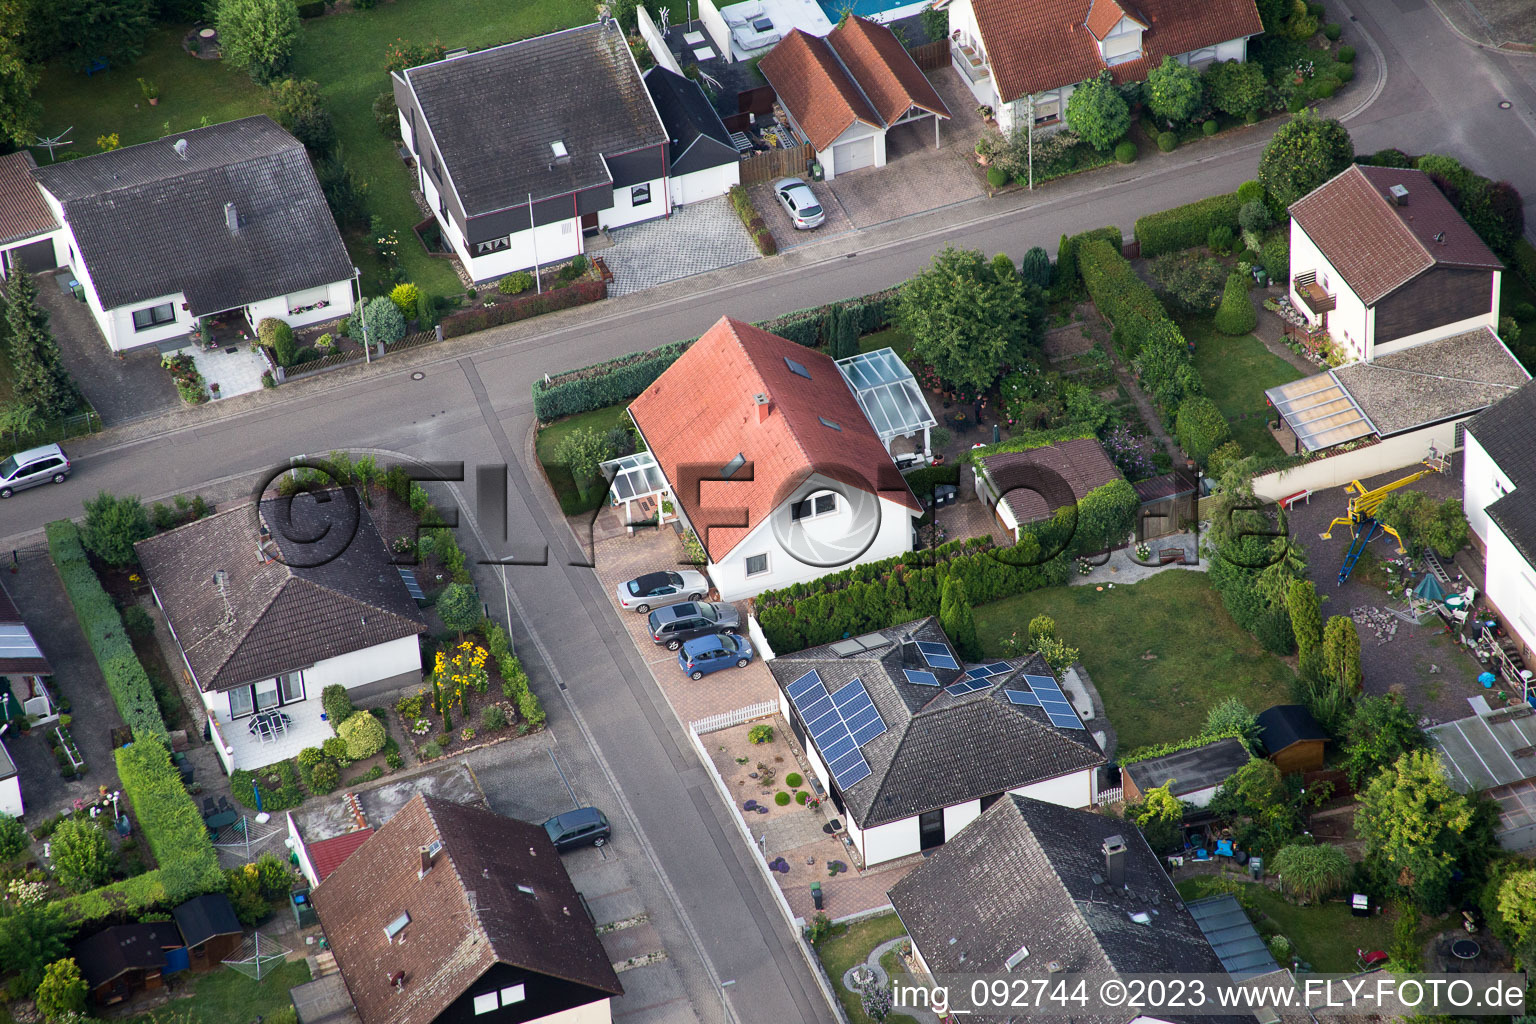 Bird's eye view of Maxburgstr in the district Billigheim in Billigheim-Ingenheim in the state Rhineland-Palatinate, Germany